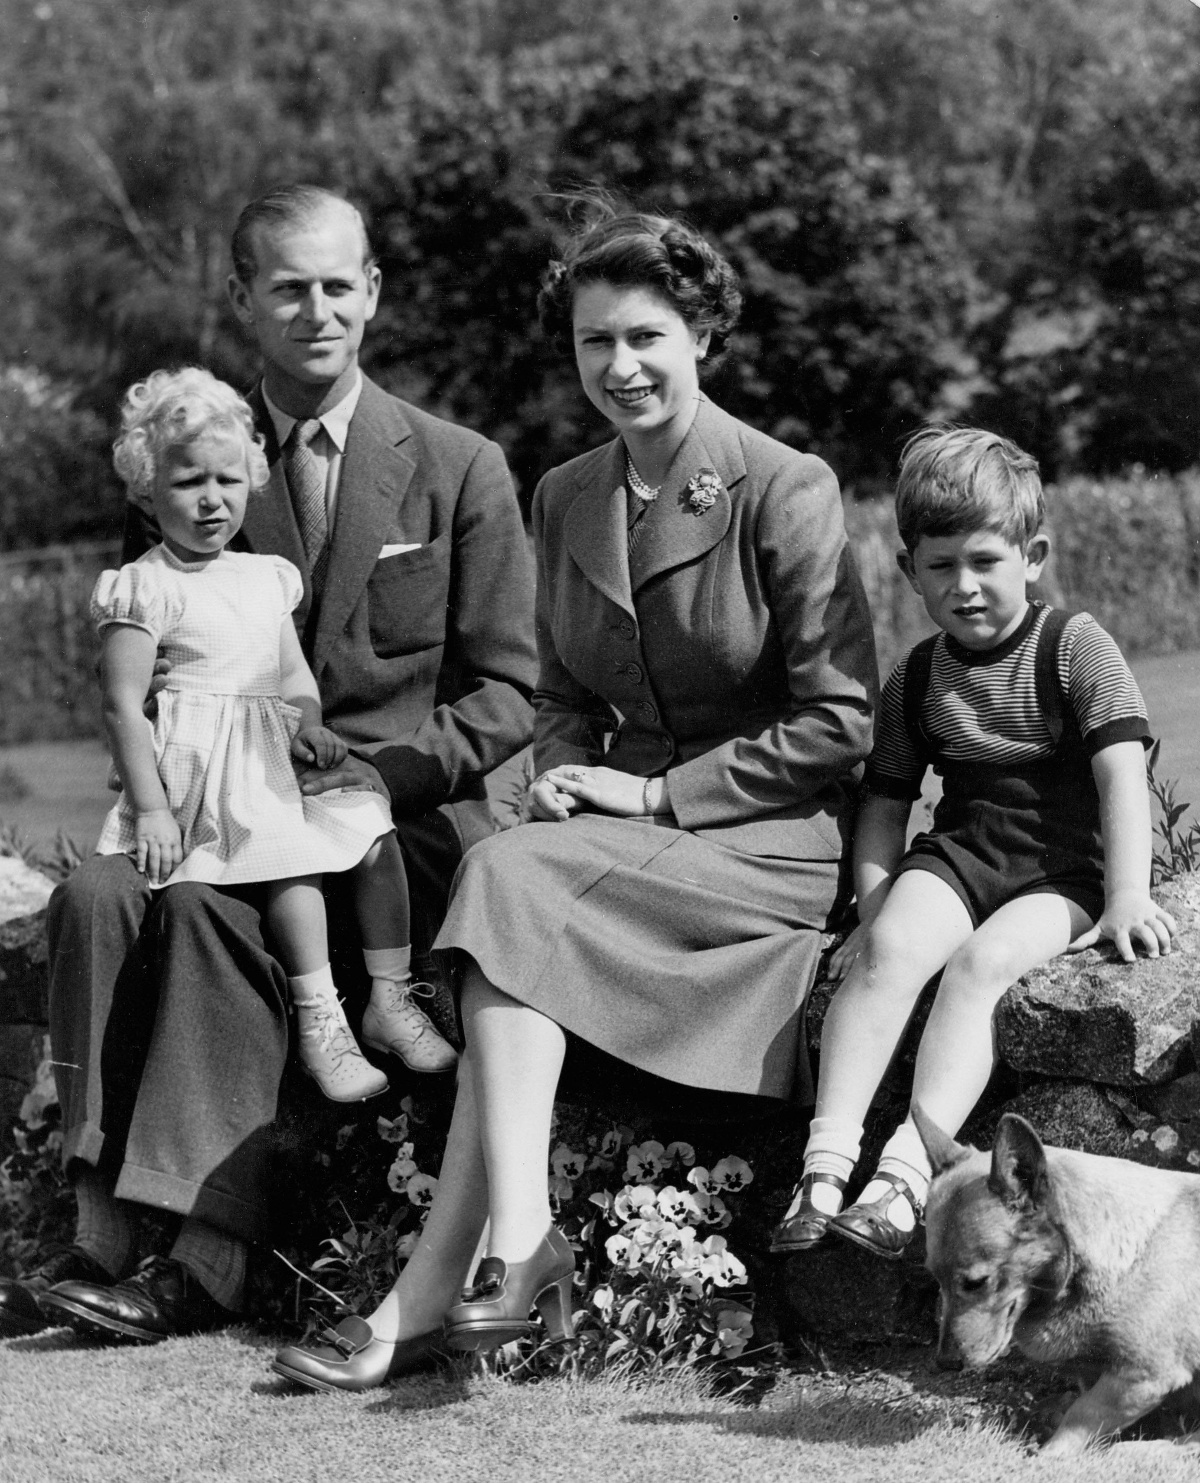 A portrait of the British Royal family including, from left, PRINCESS ANNE, PRINCE PHILIP, QUEEN ELIZABETH II, PRINCE CHARLES, one of the royal pet Corgis